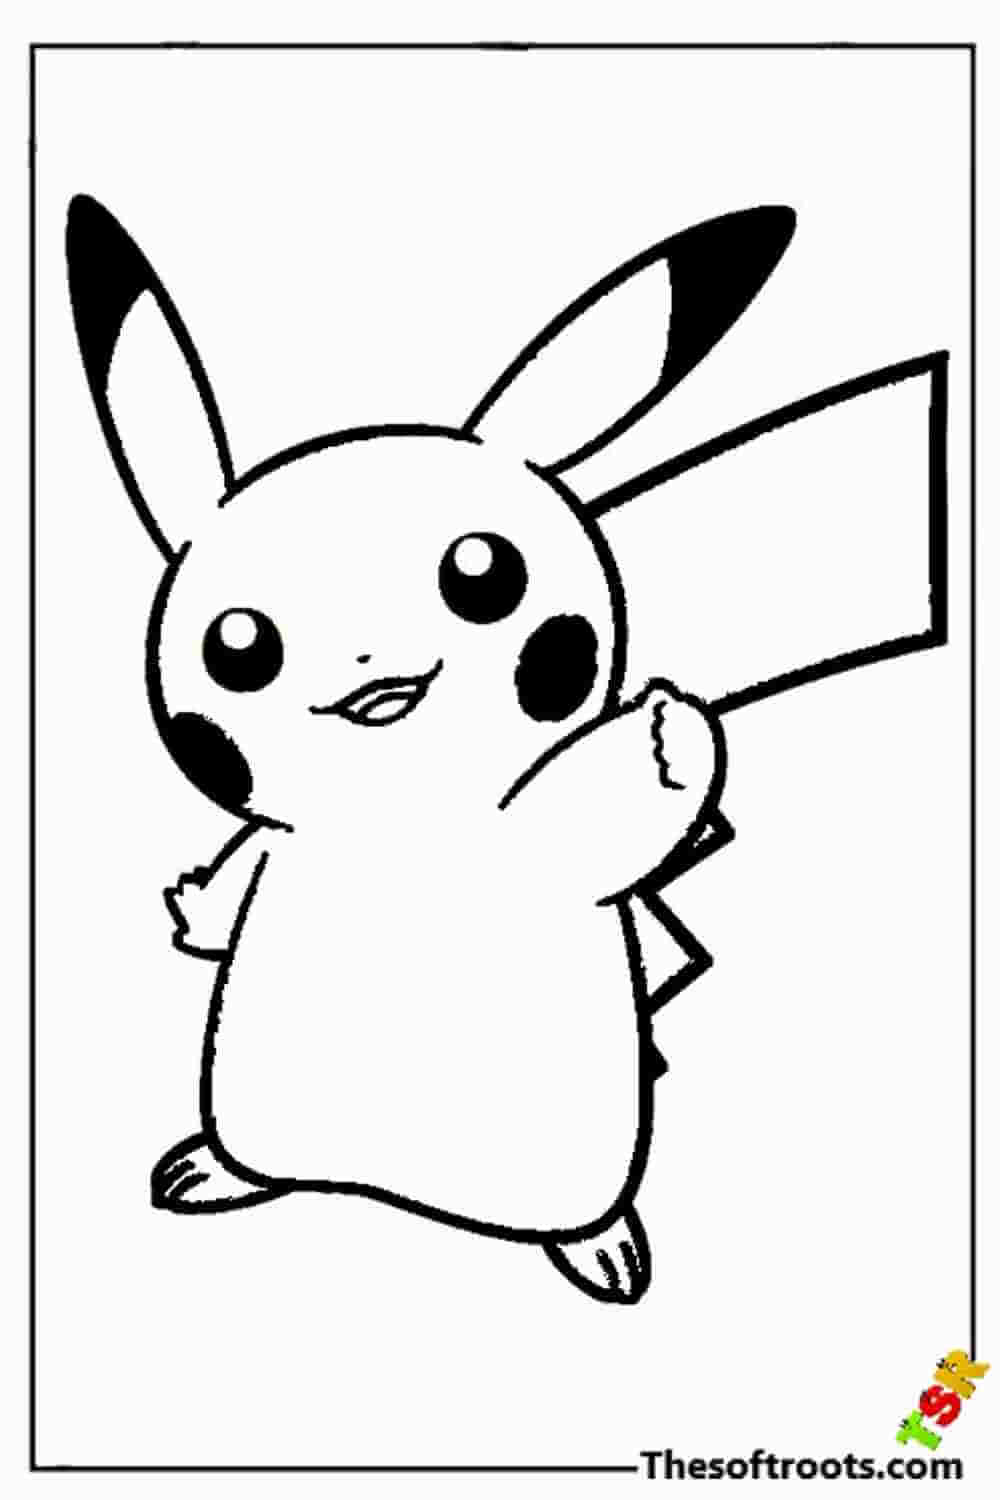 Cool Pikachu coloring pages